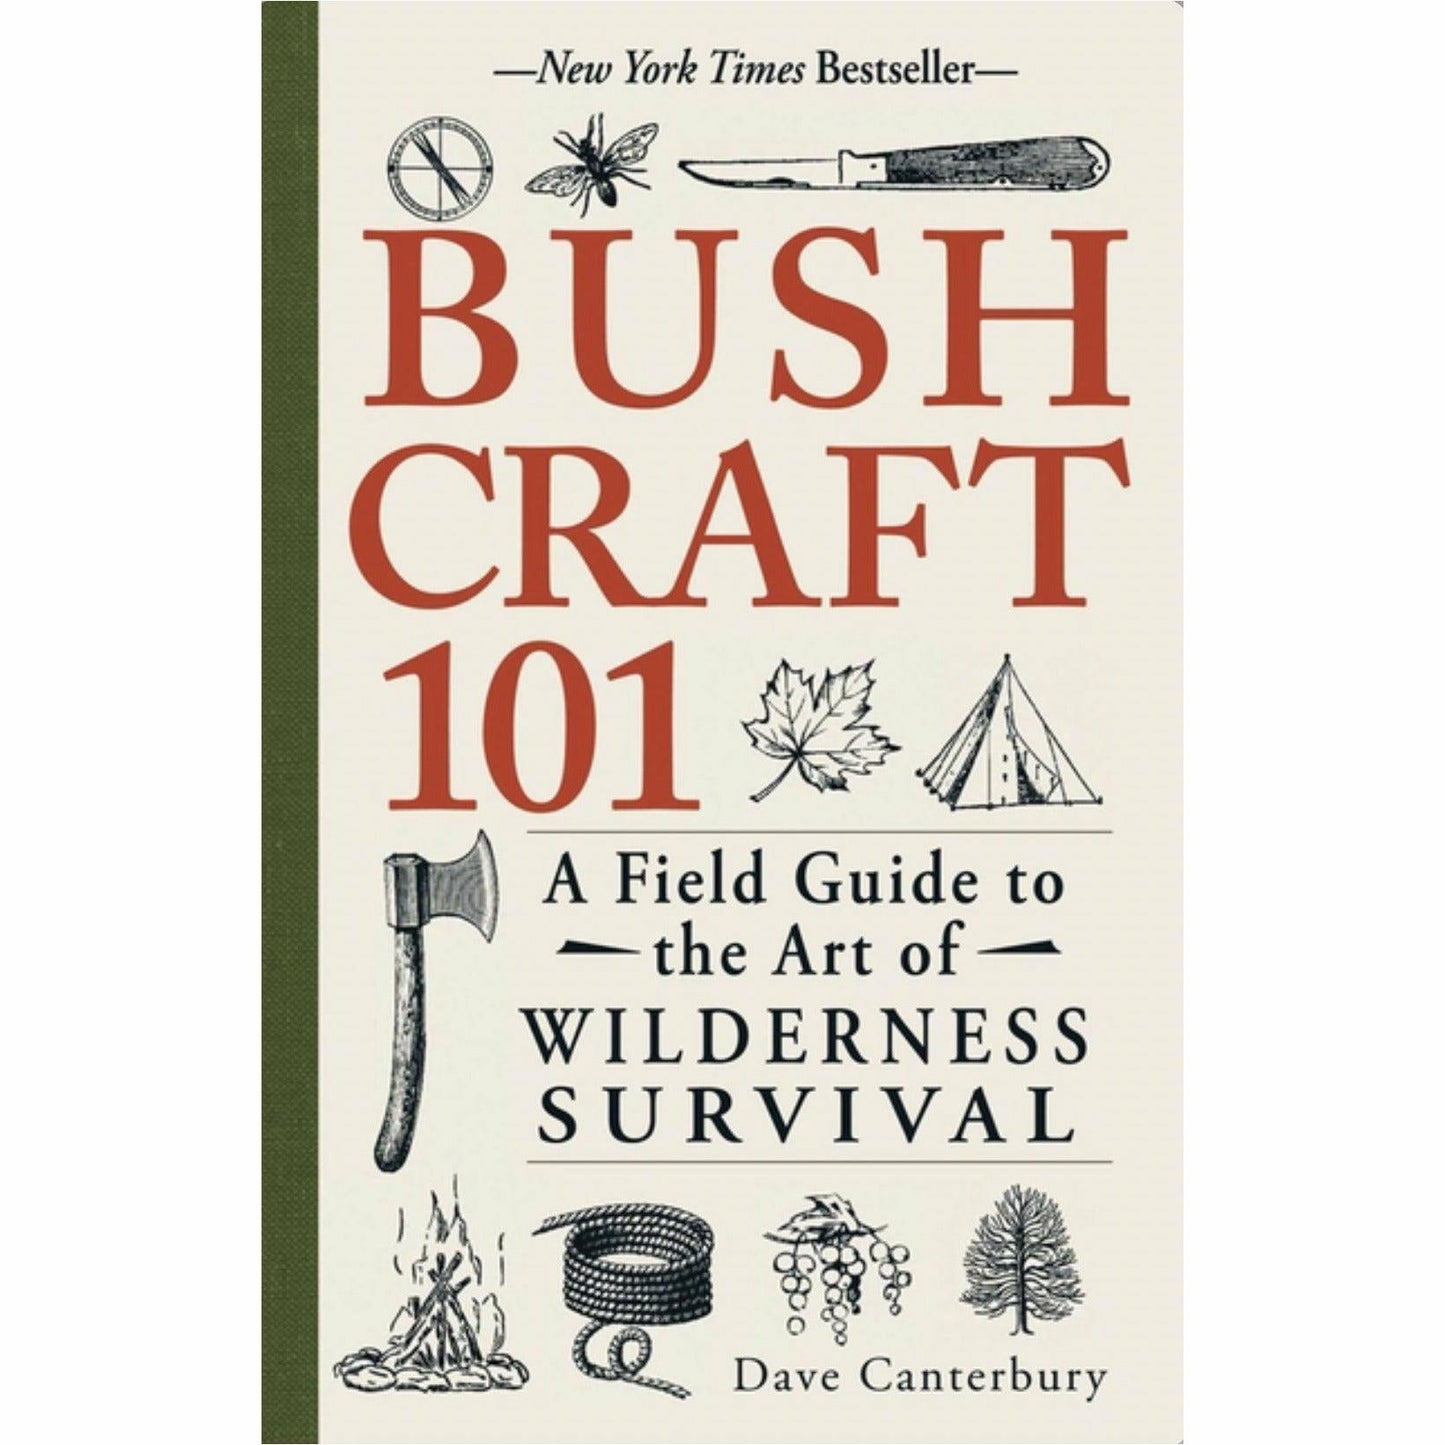 Bushcraft 101 | A Field Guide to the Art of Wilderness Survival - Ninth & Pine